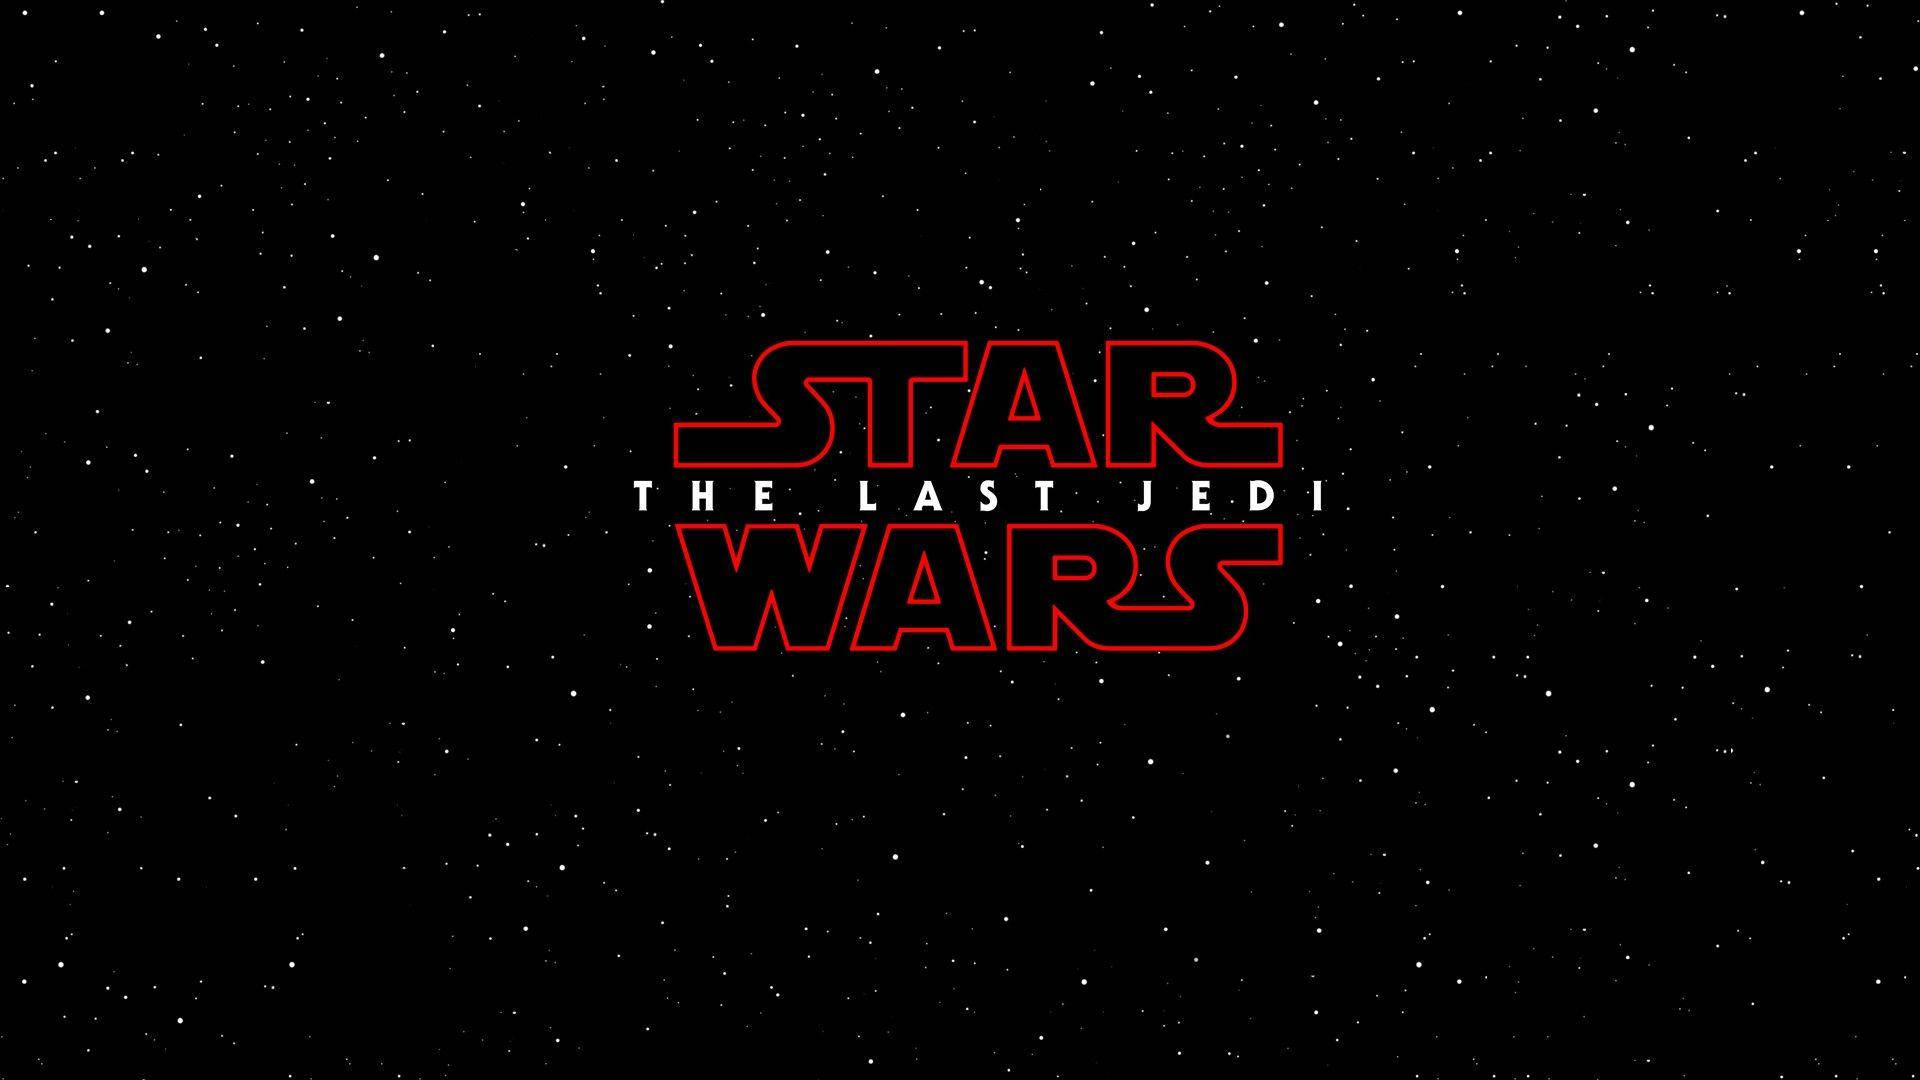 Star wars: the last jedi hd wallpapers, hd images, backgrounds